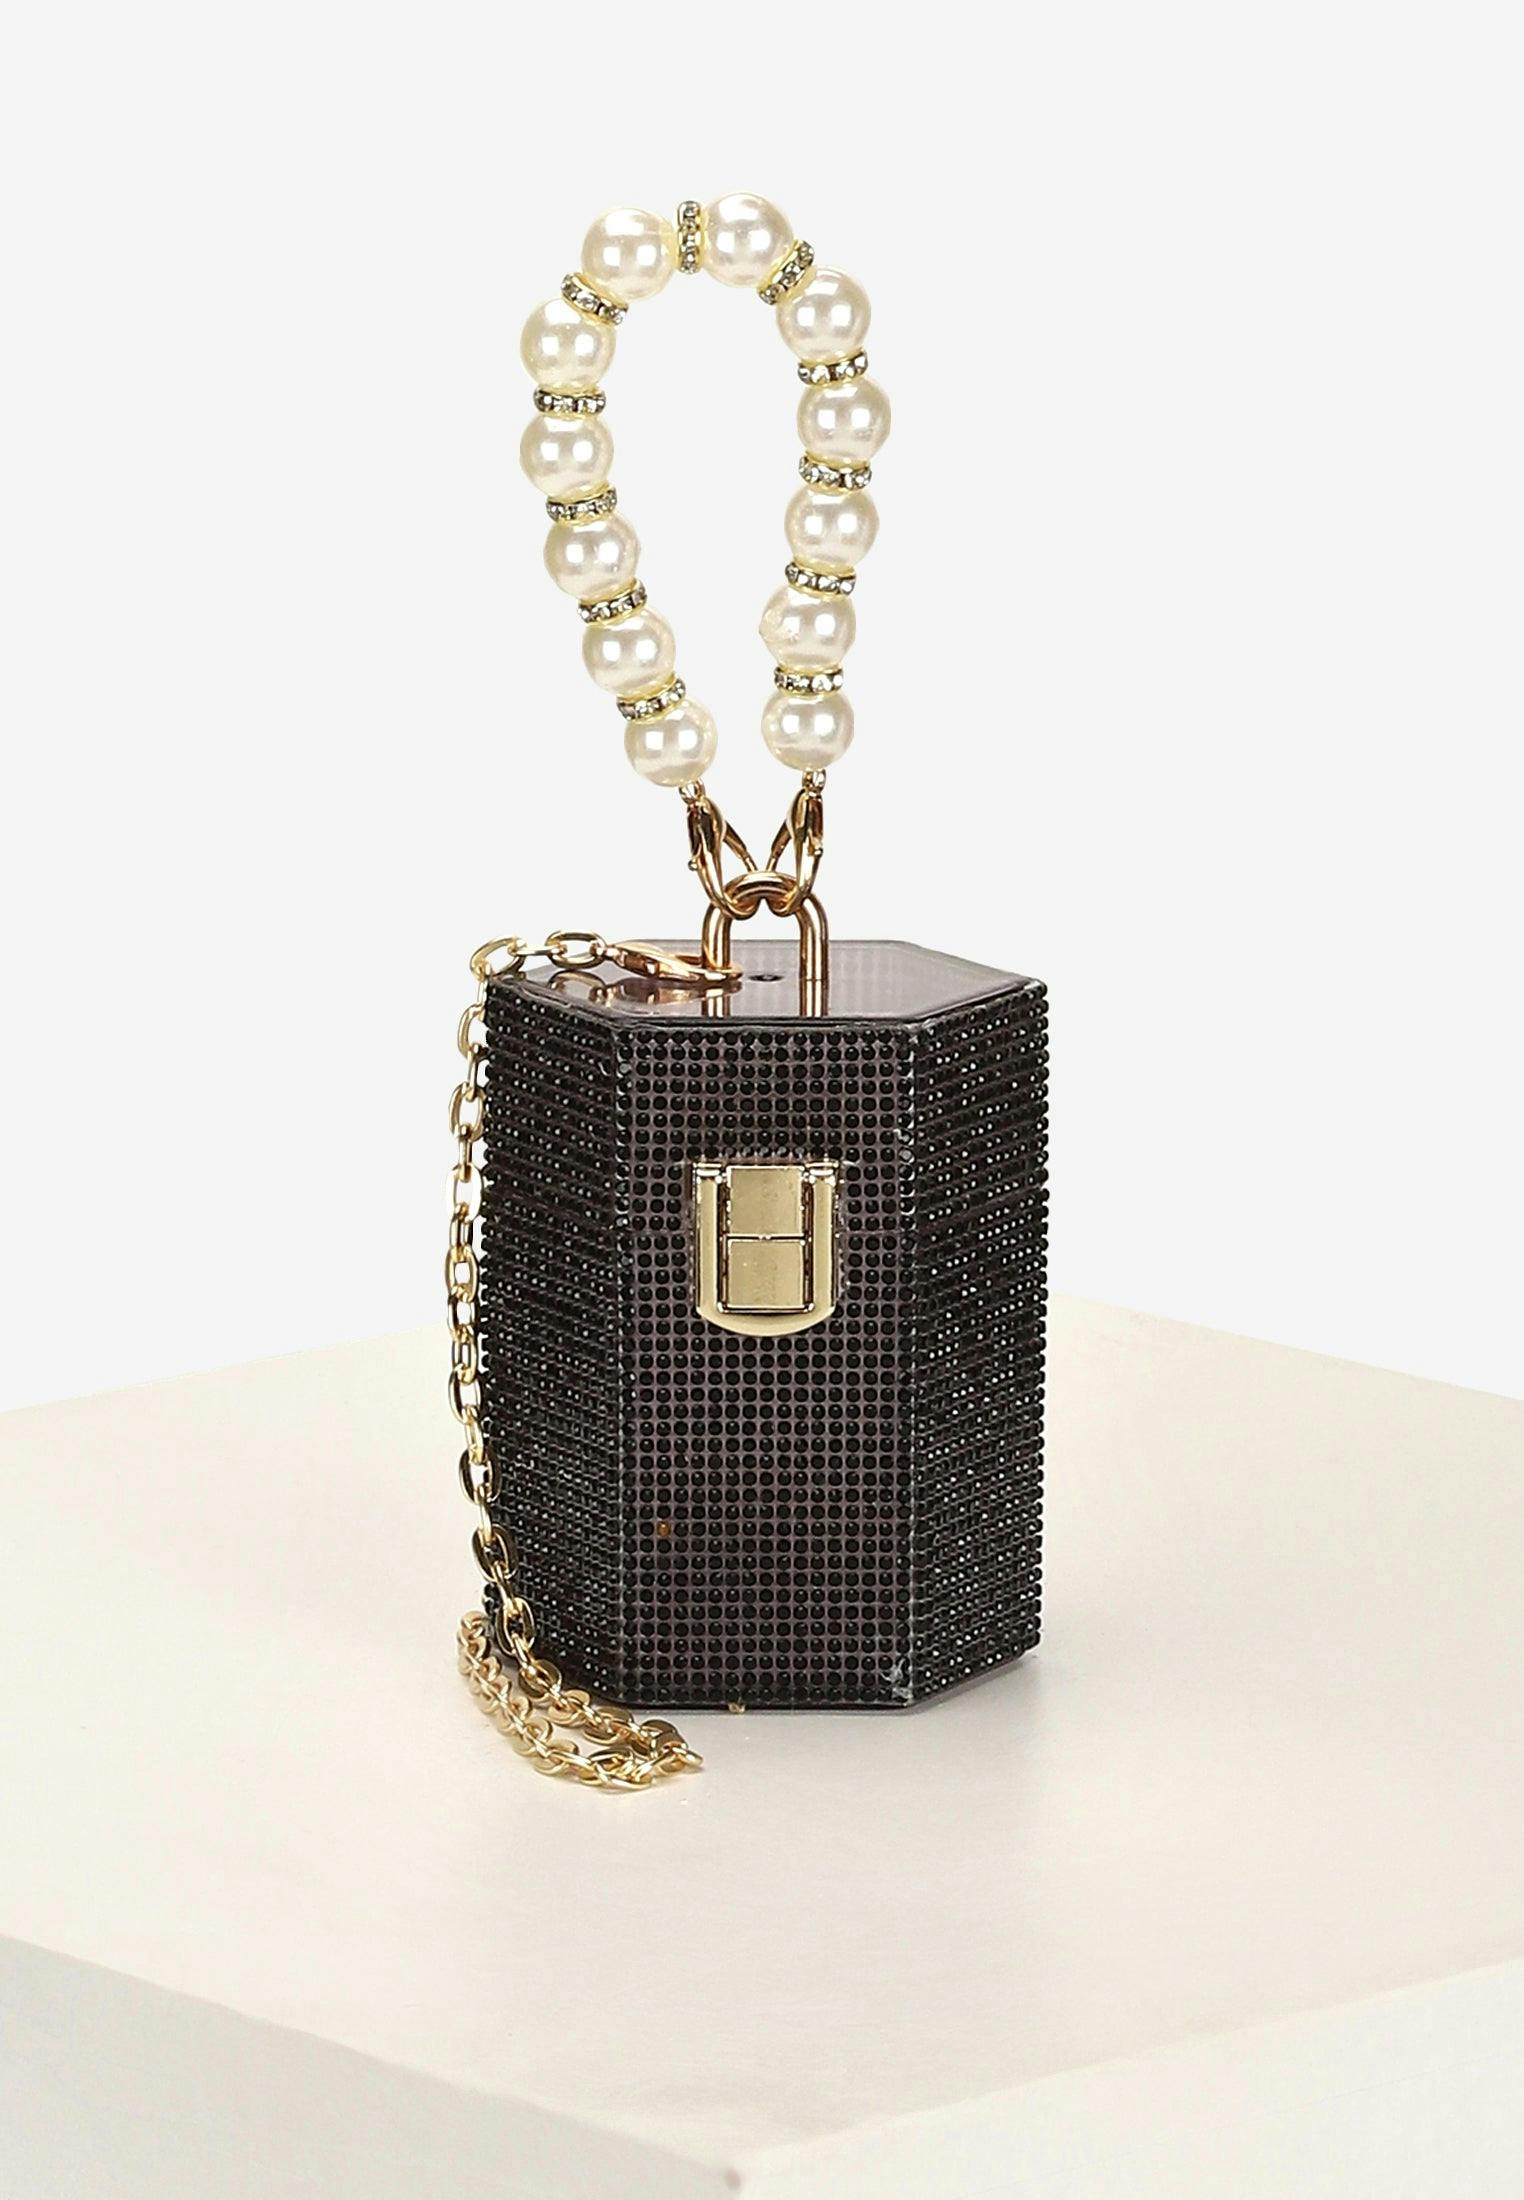 Miniaudre Clutch in Black Diamanté, a product by Lola's